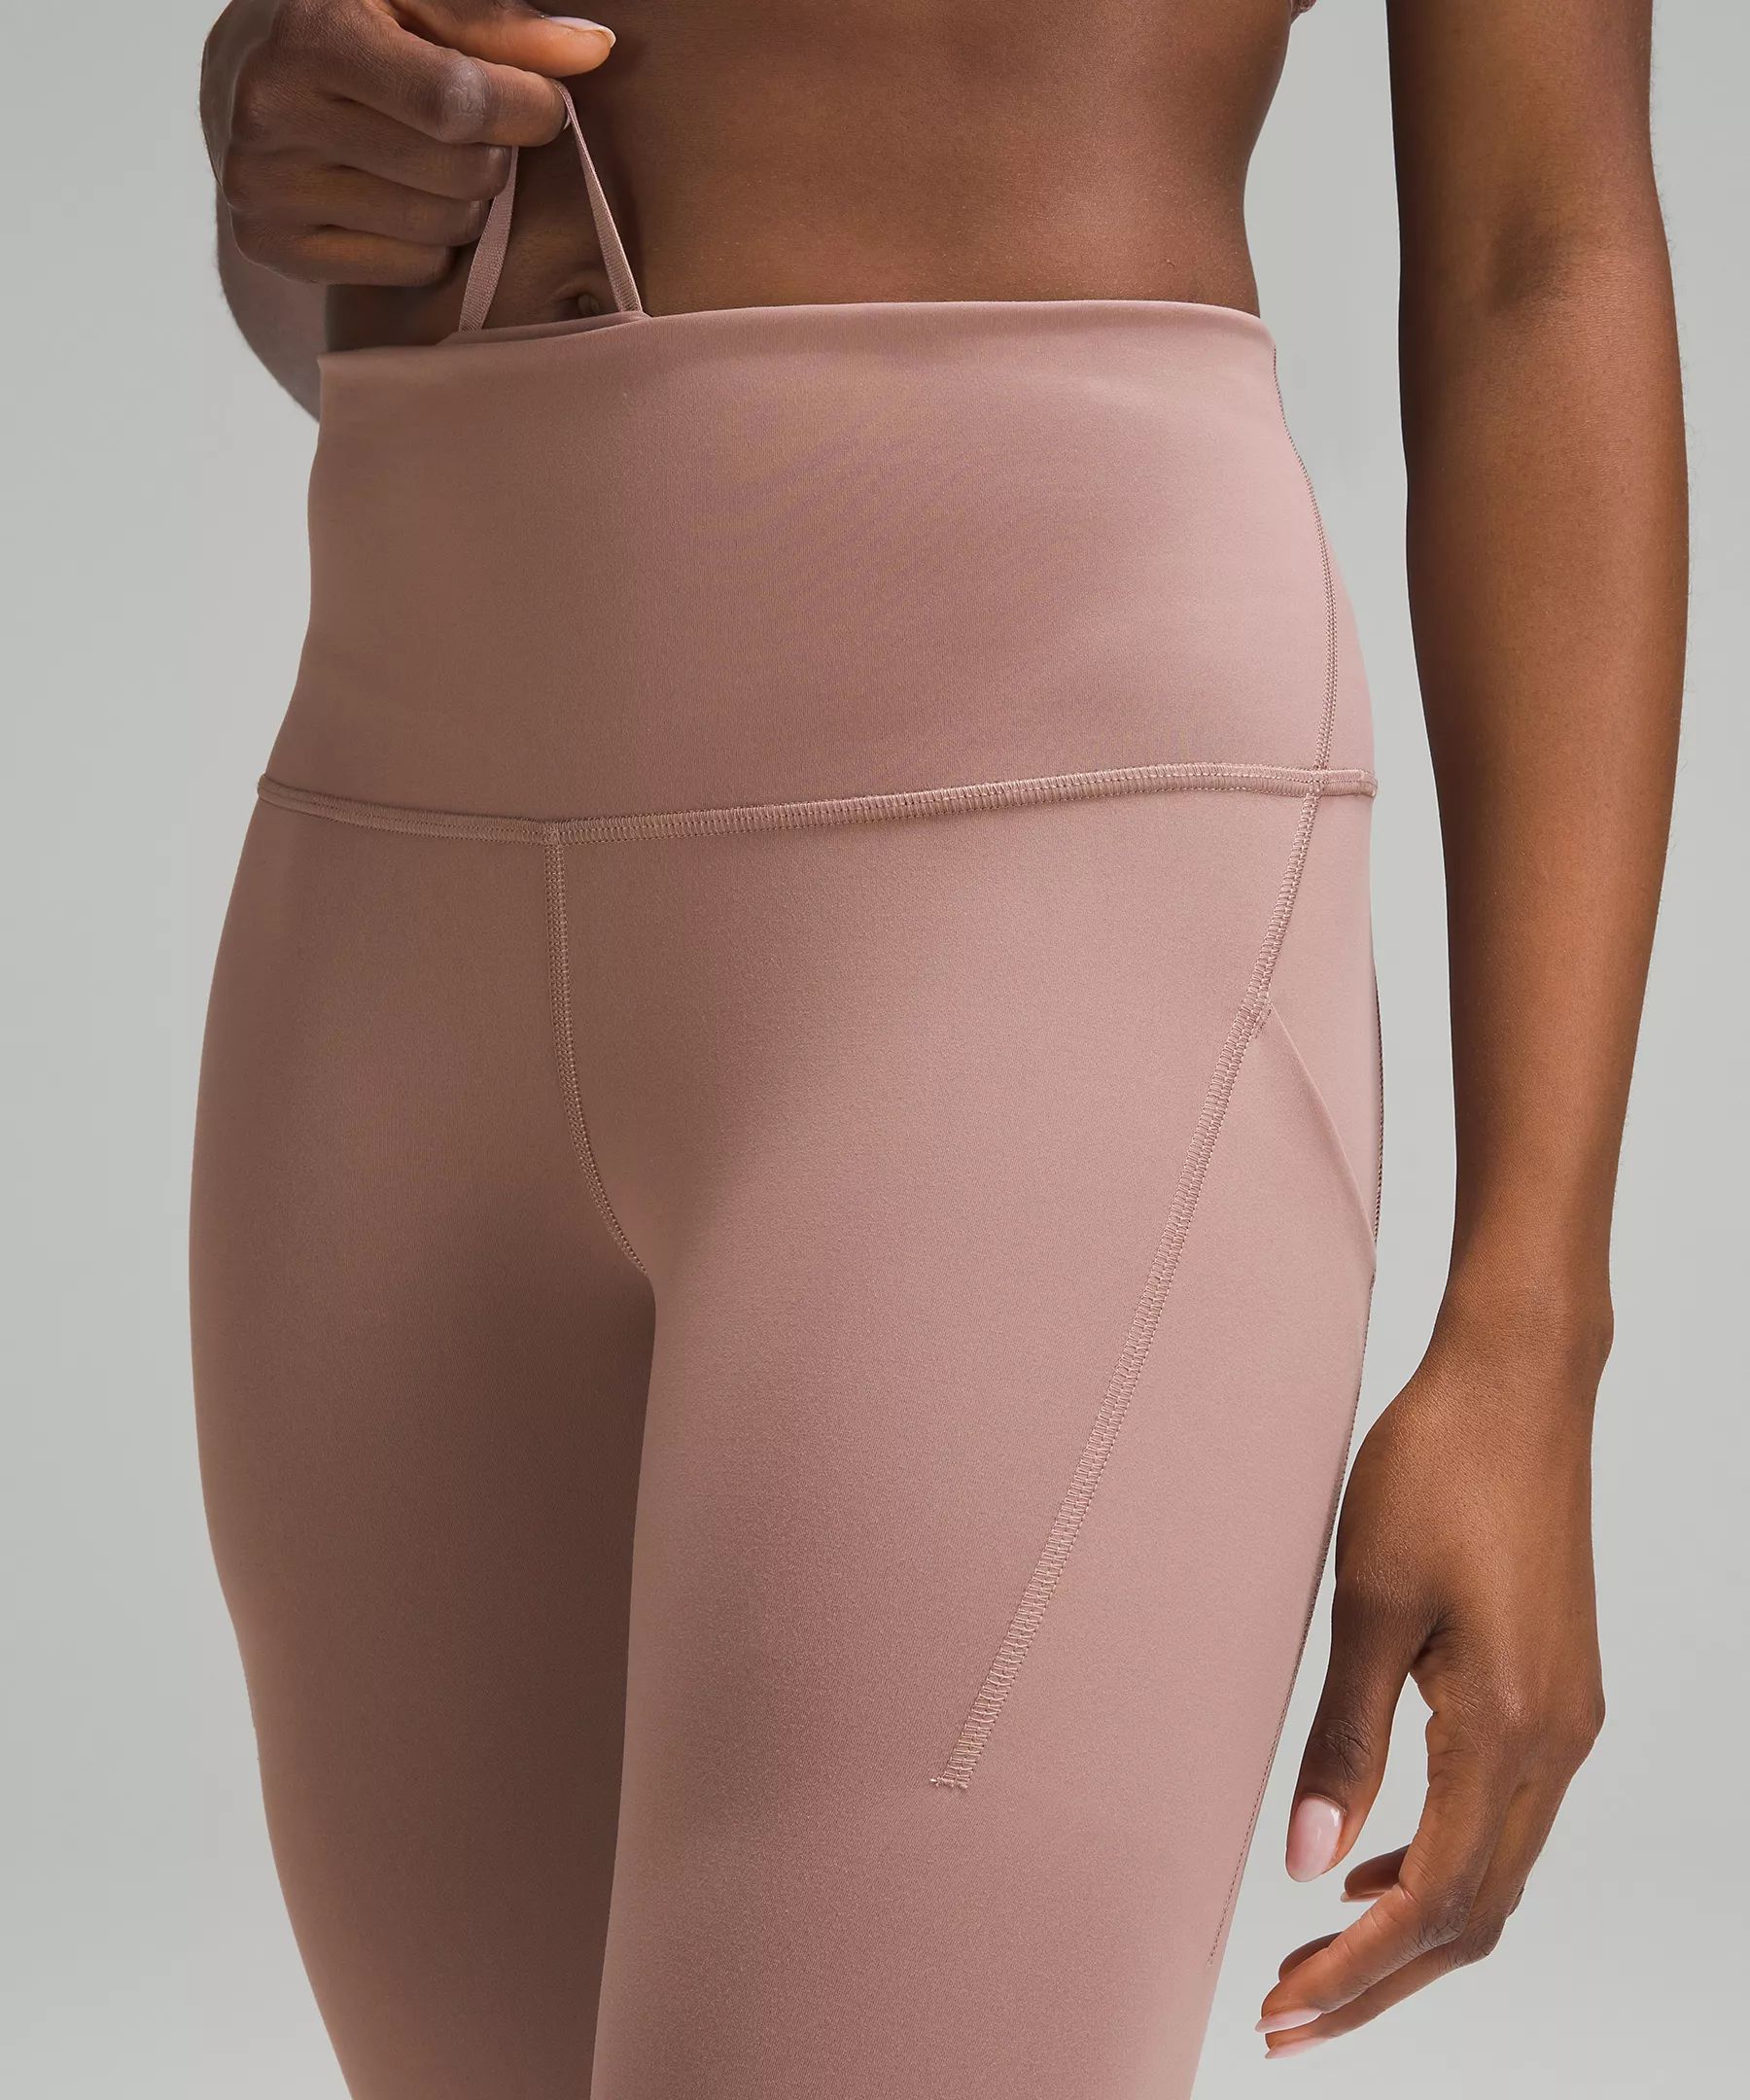 Wunder Train High-Rise Tight with Pockets 25" | Lululemon (US)